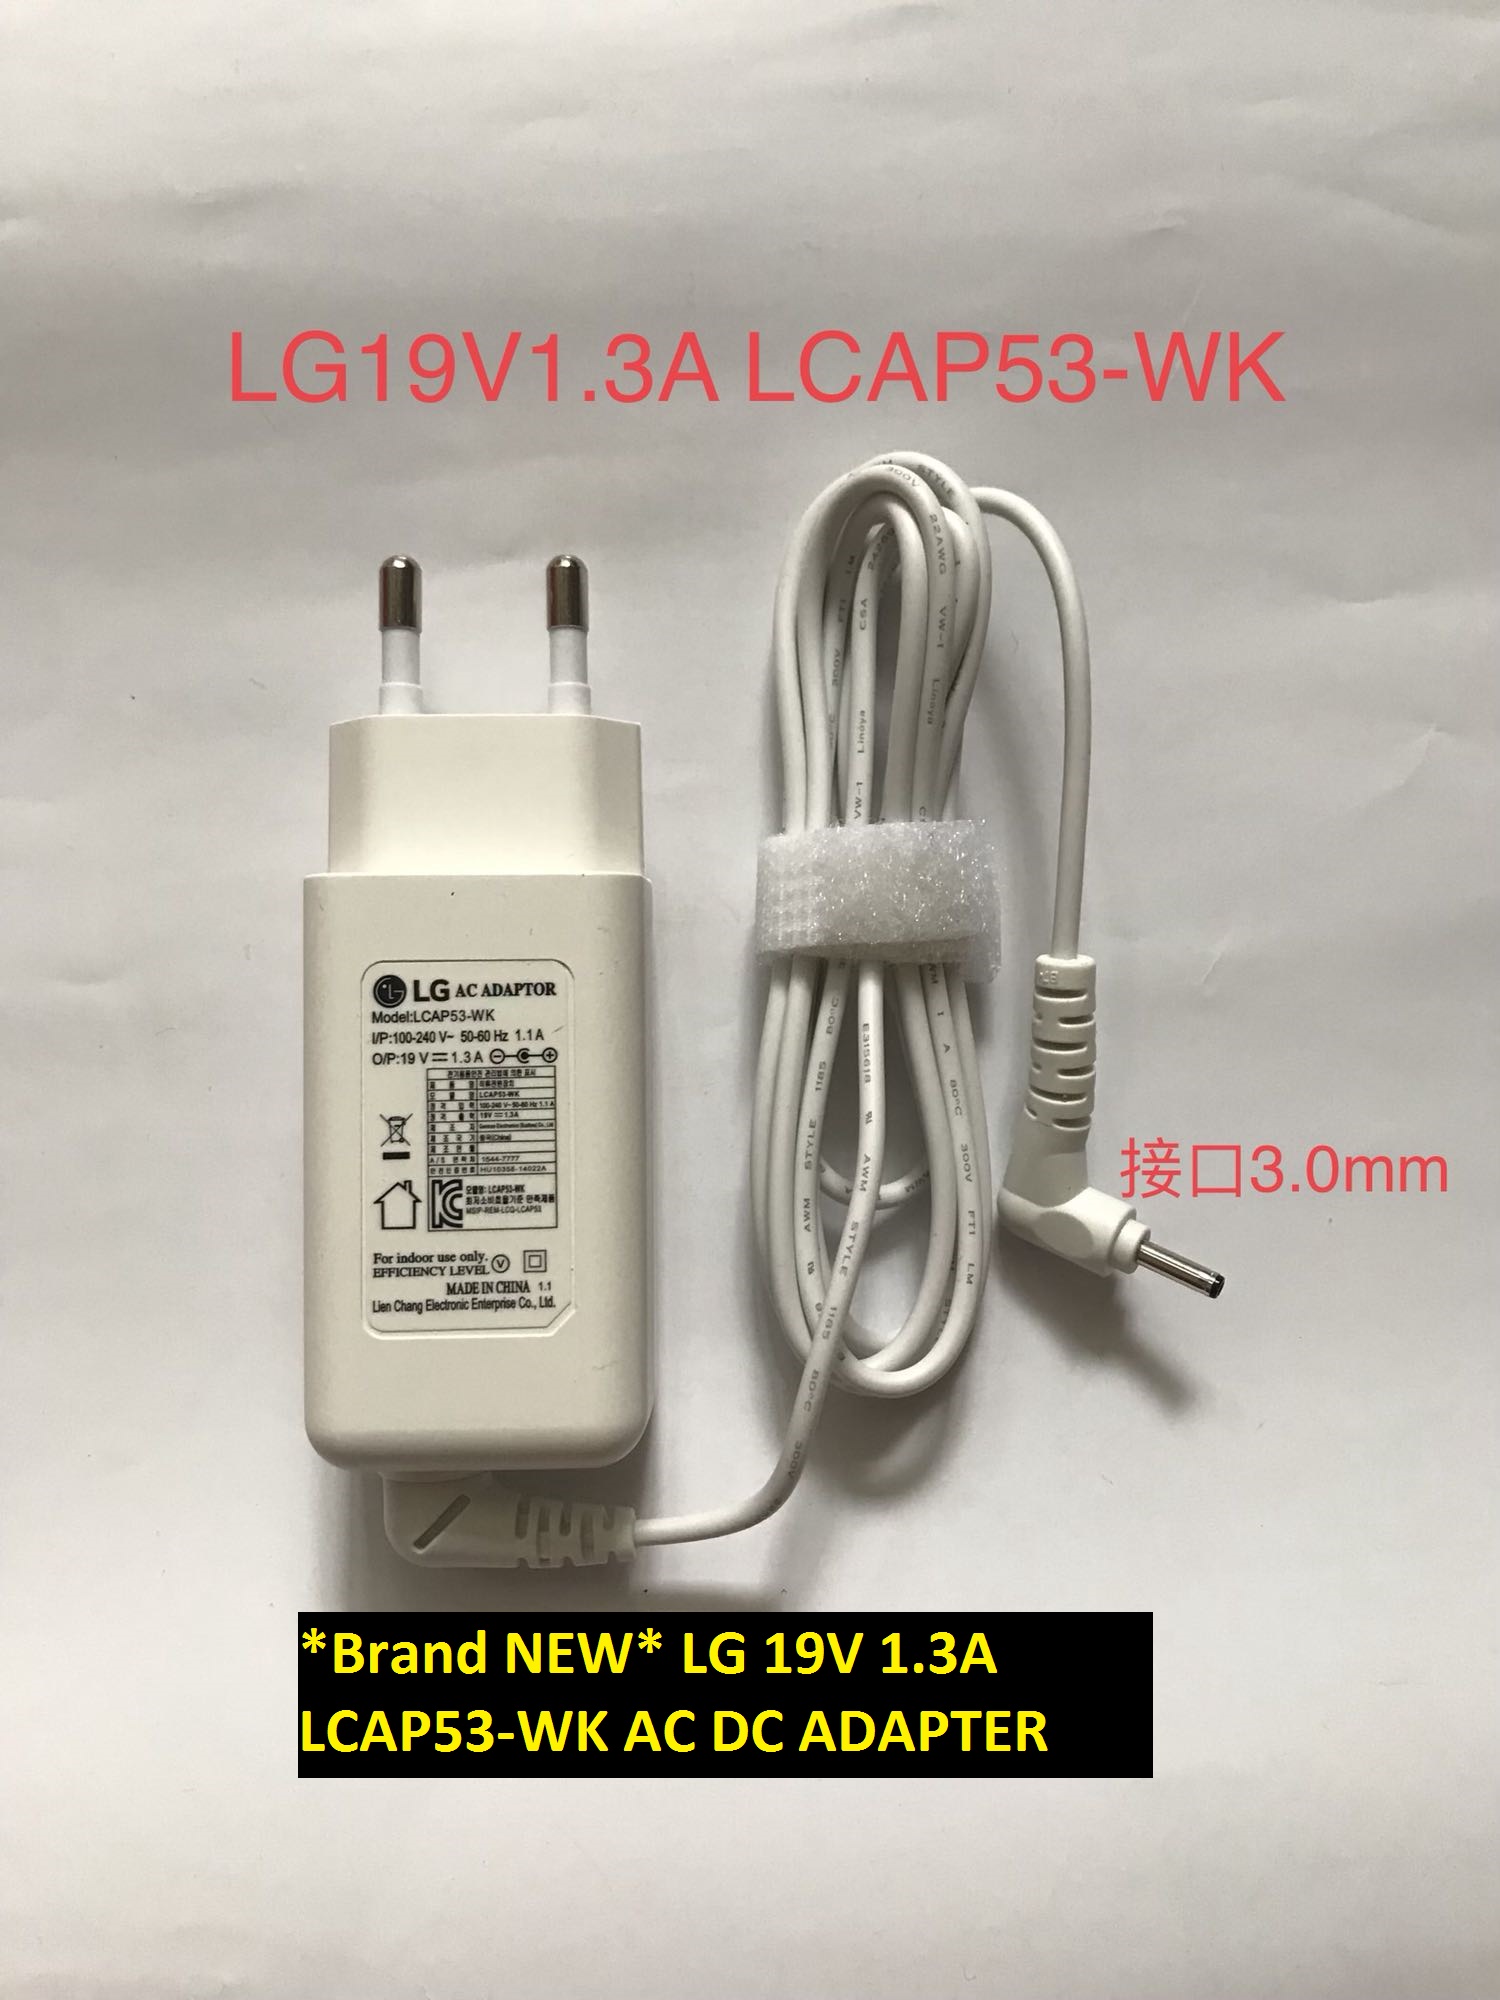 *Brand NEW* LG 19V 1.3A LCAP53-WK AC DC ADAPTER POWER SUPPLY